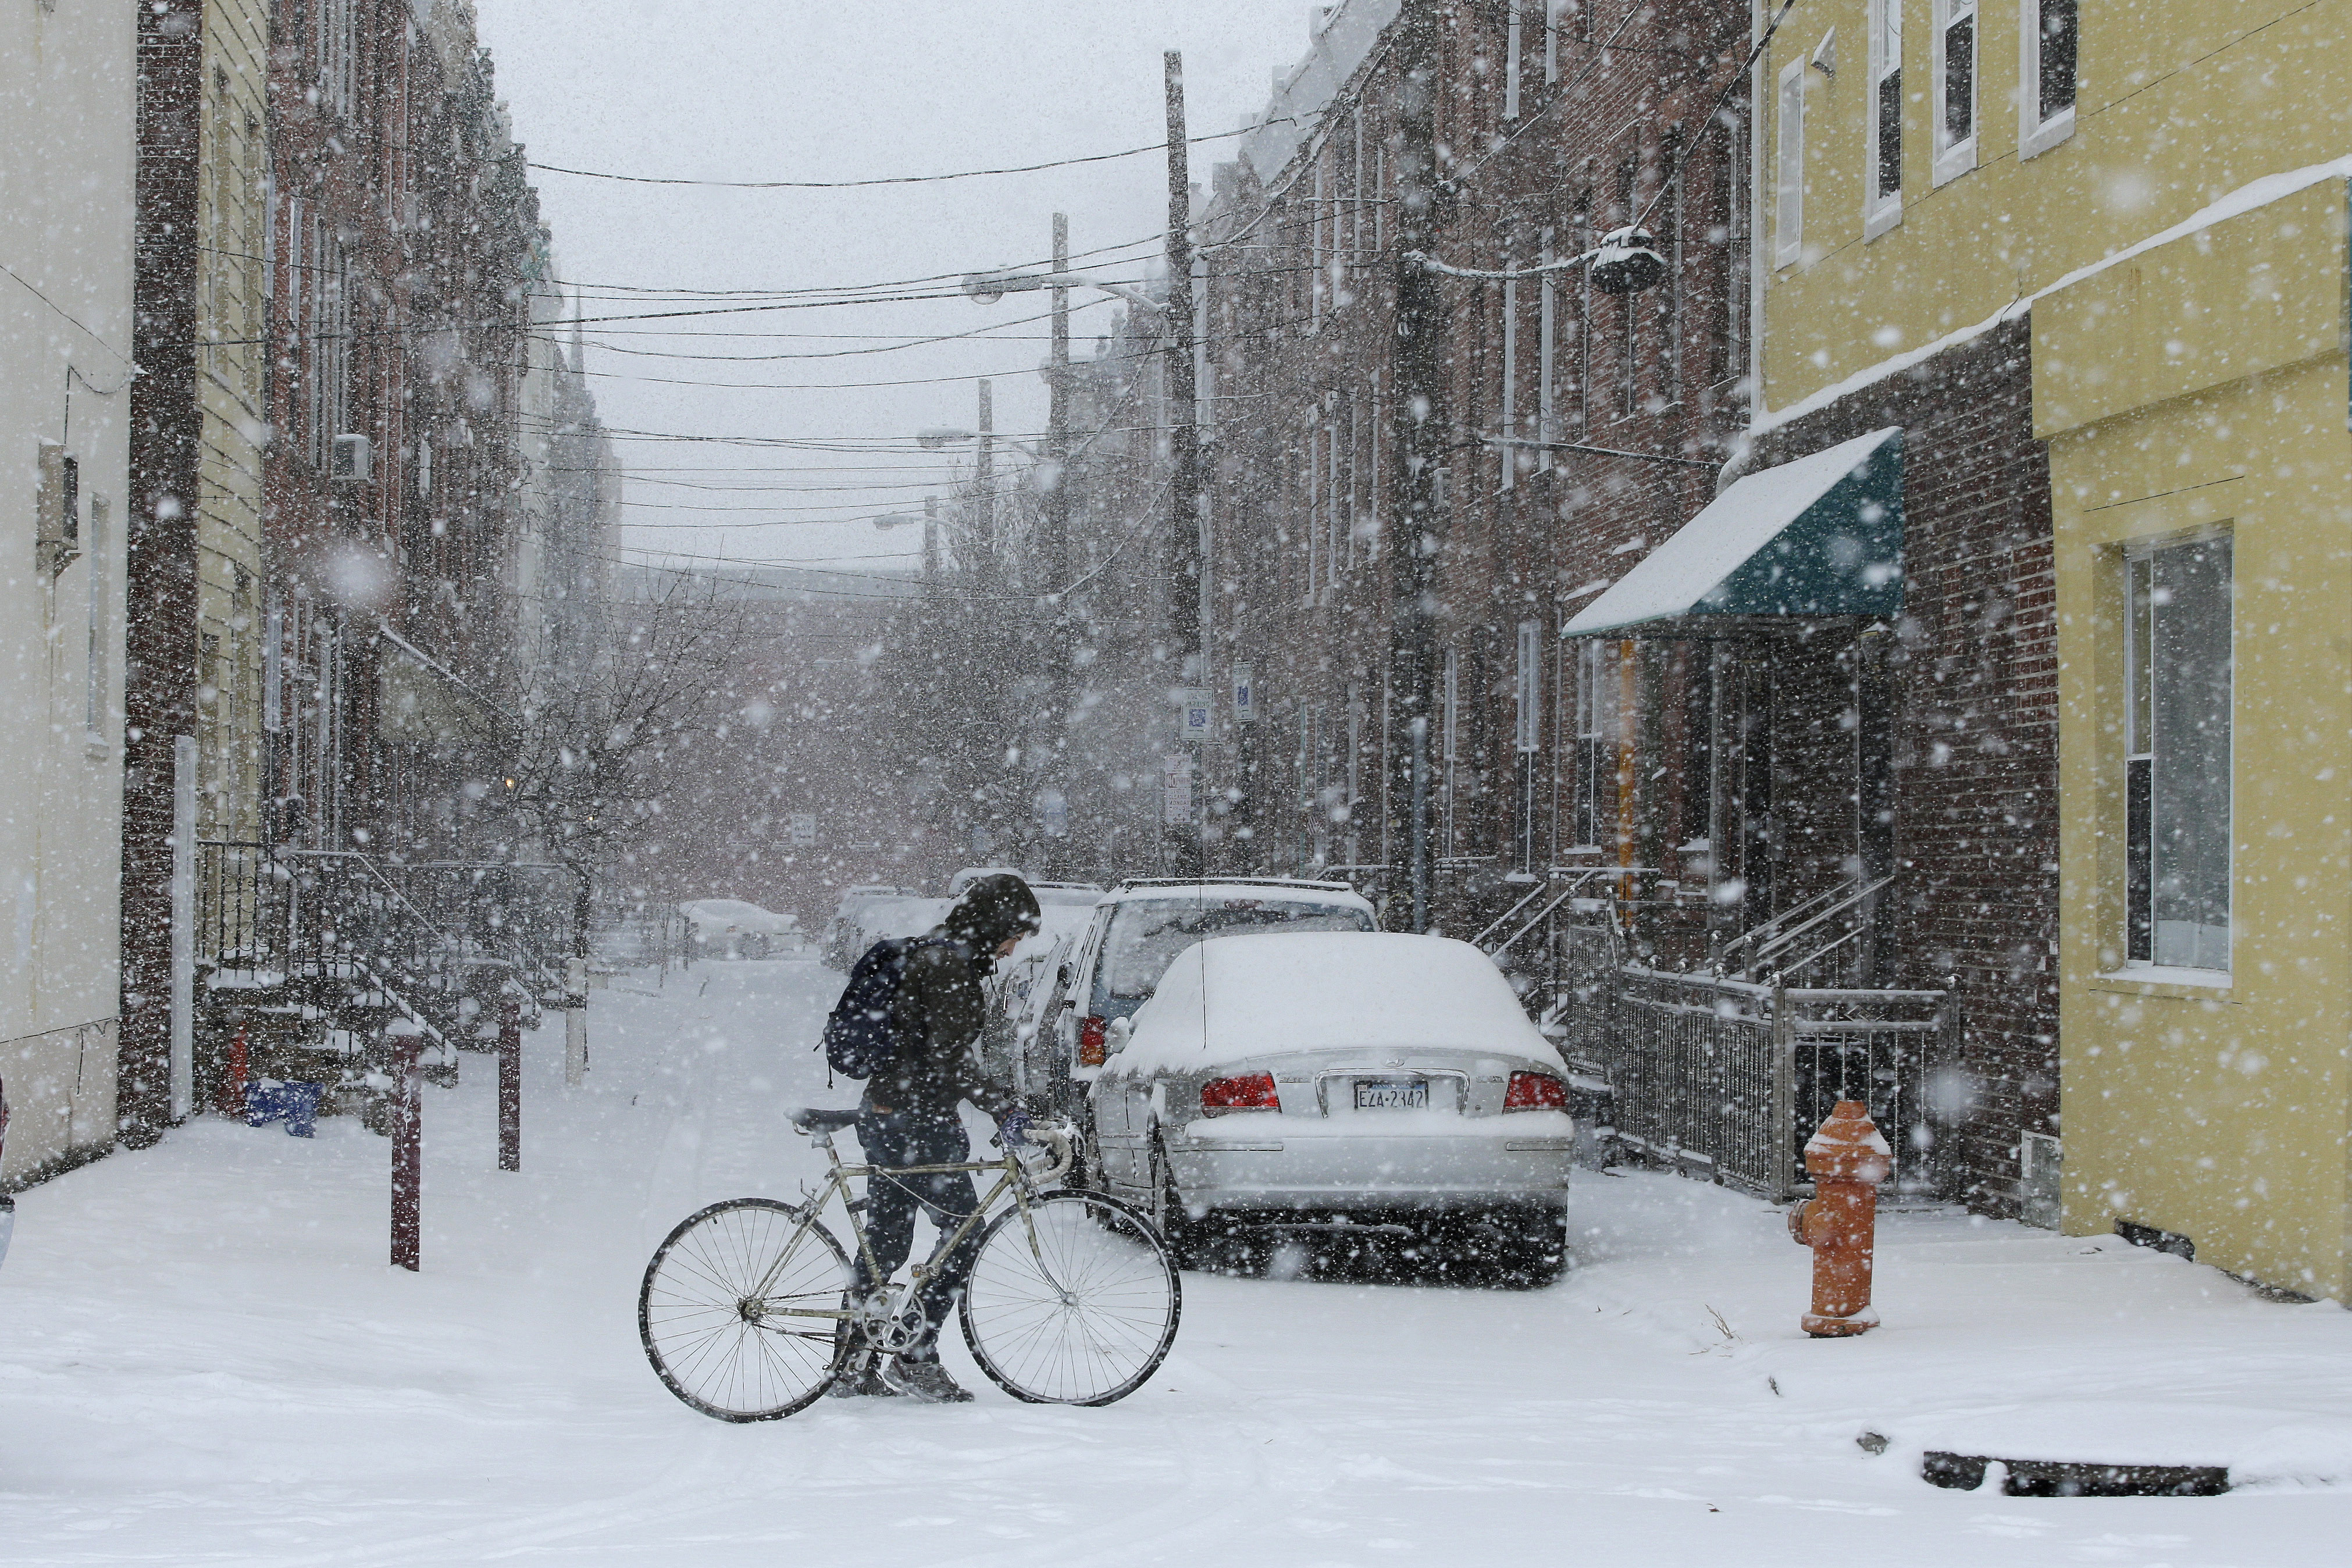 Snow storm snarls travel on East Coast; at least one death reported